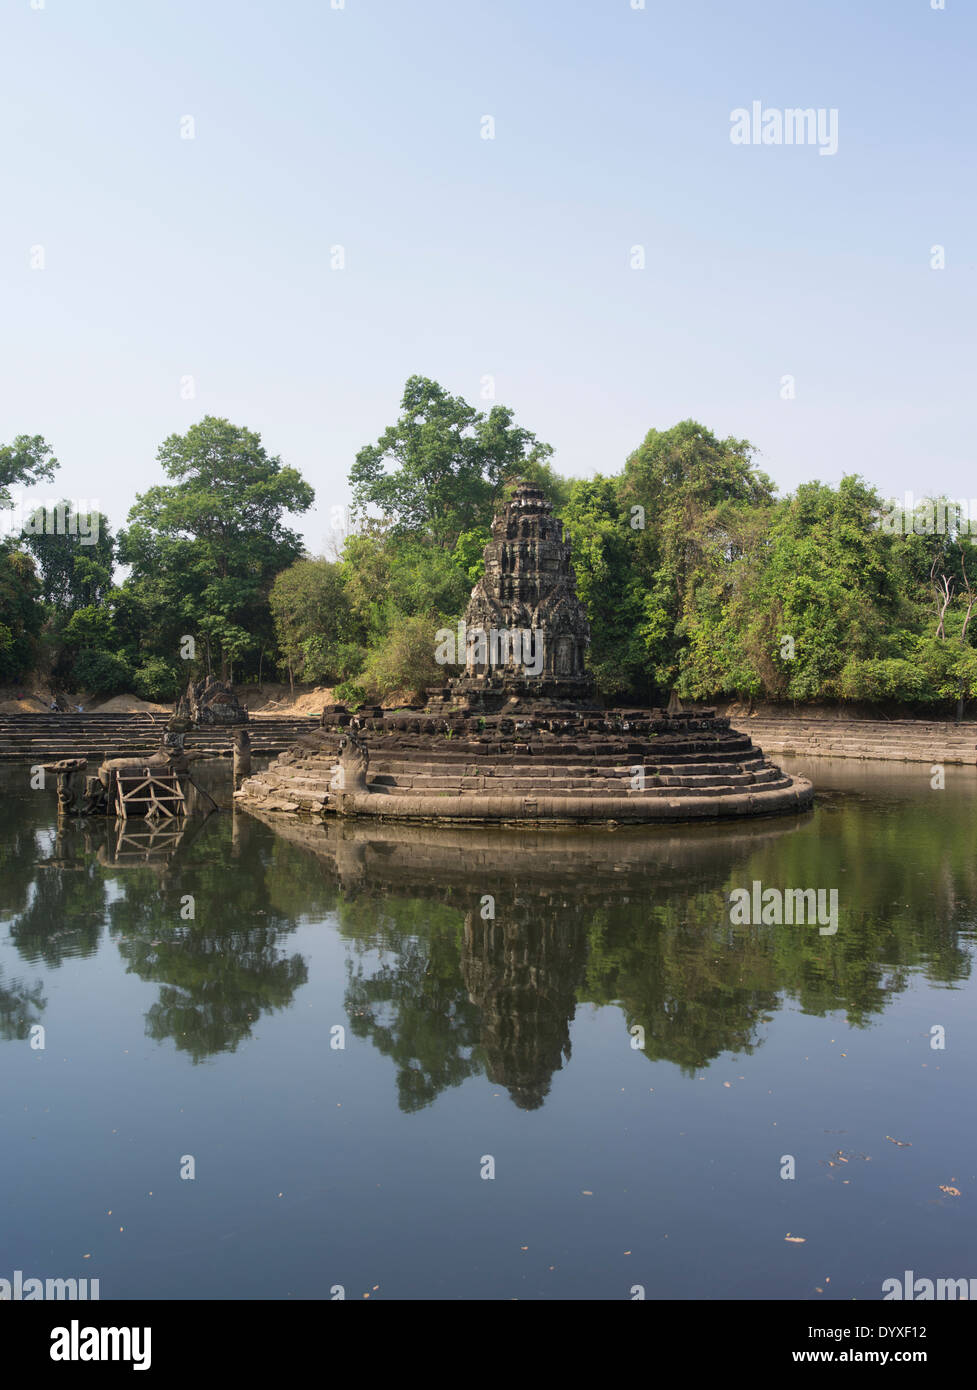 Prasat on the islet of the central basin. Neak Pean Temple, Siem Reap, Cambodia Stock Photo